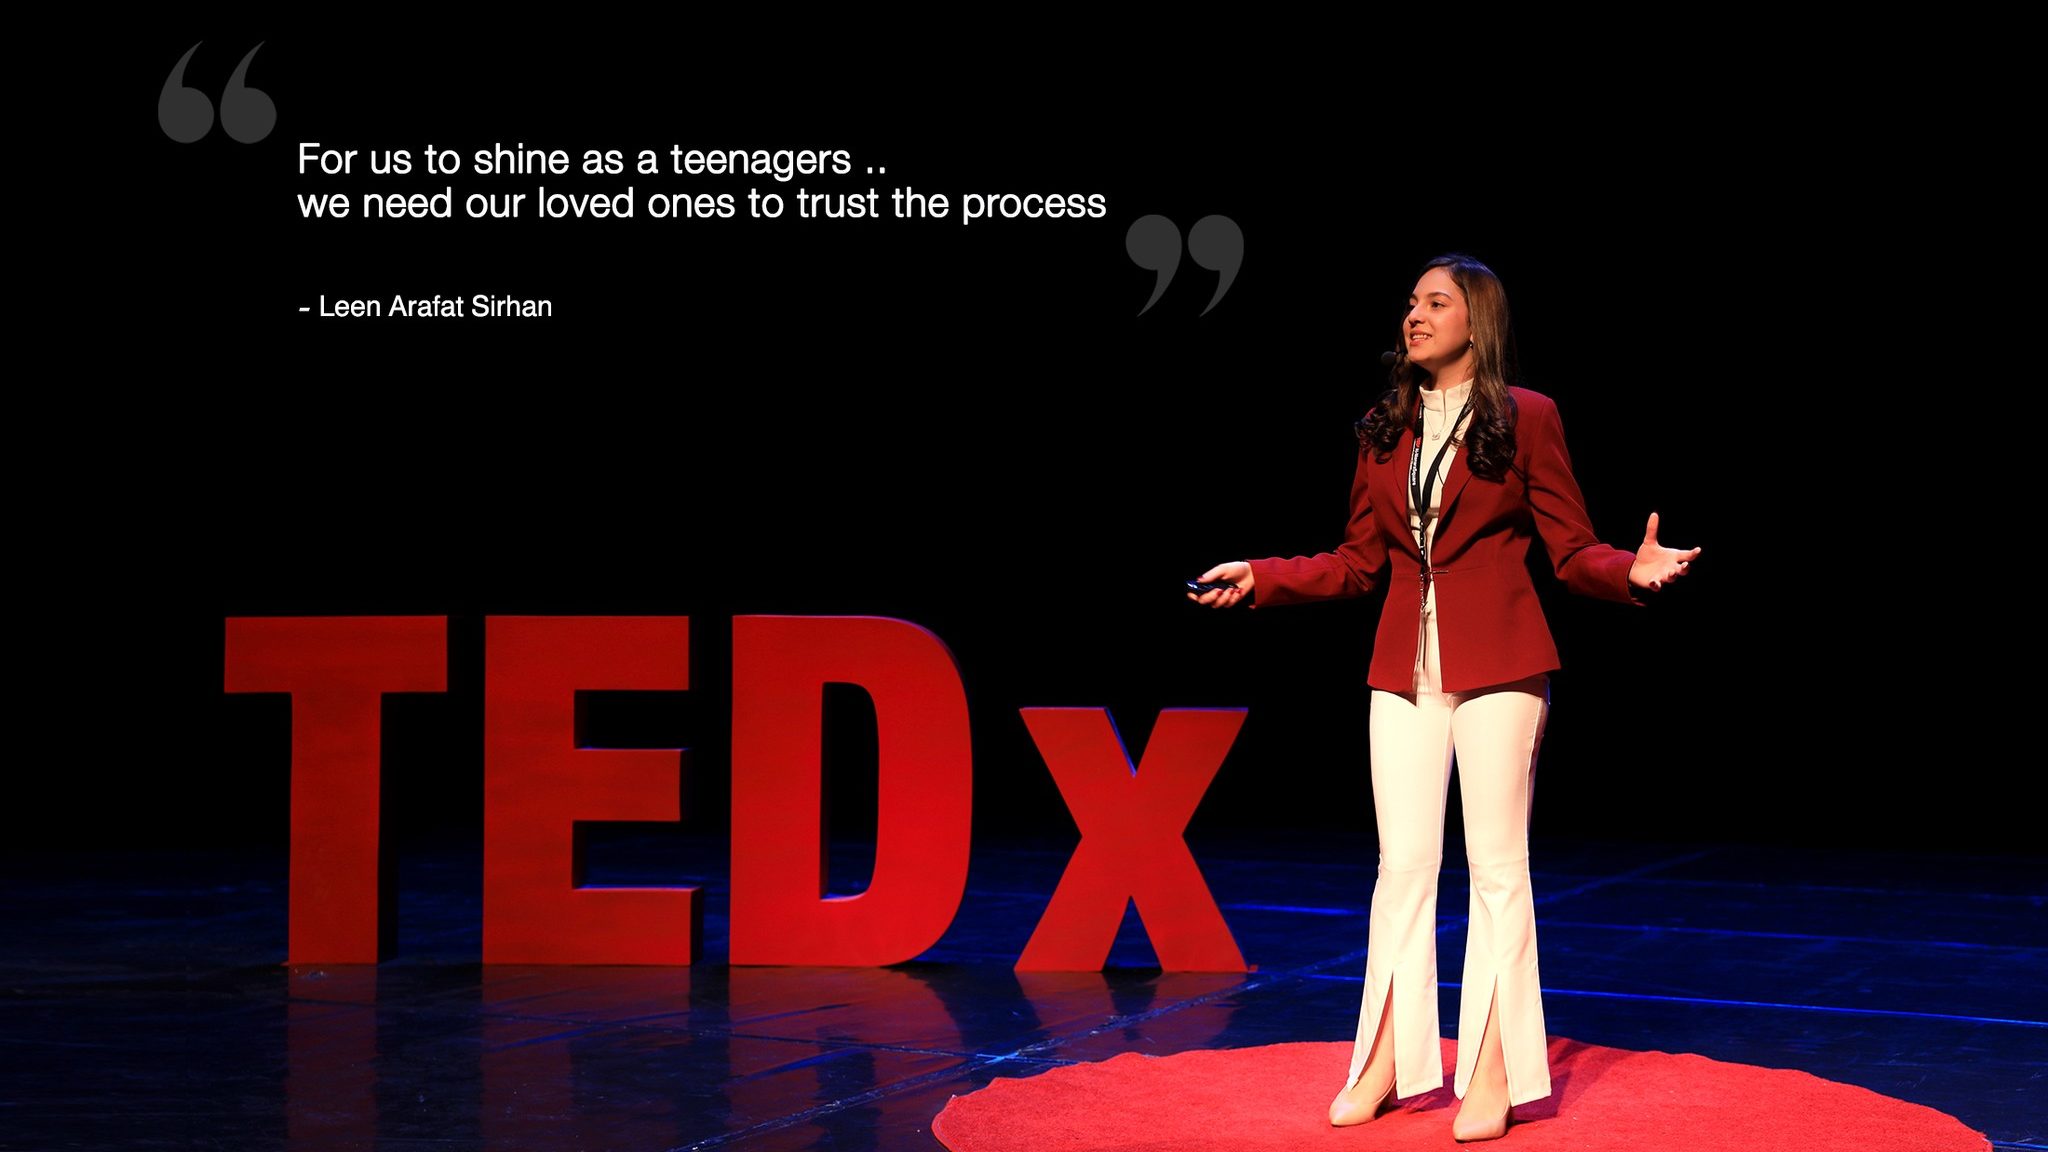 At TEDx in Ramallah, Palestinian Storytellers Share Personal Experiences To Inspire Others